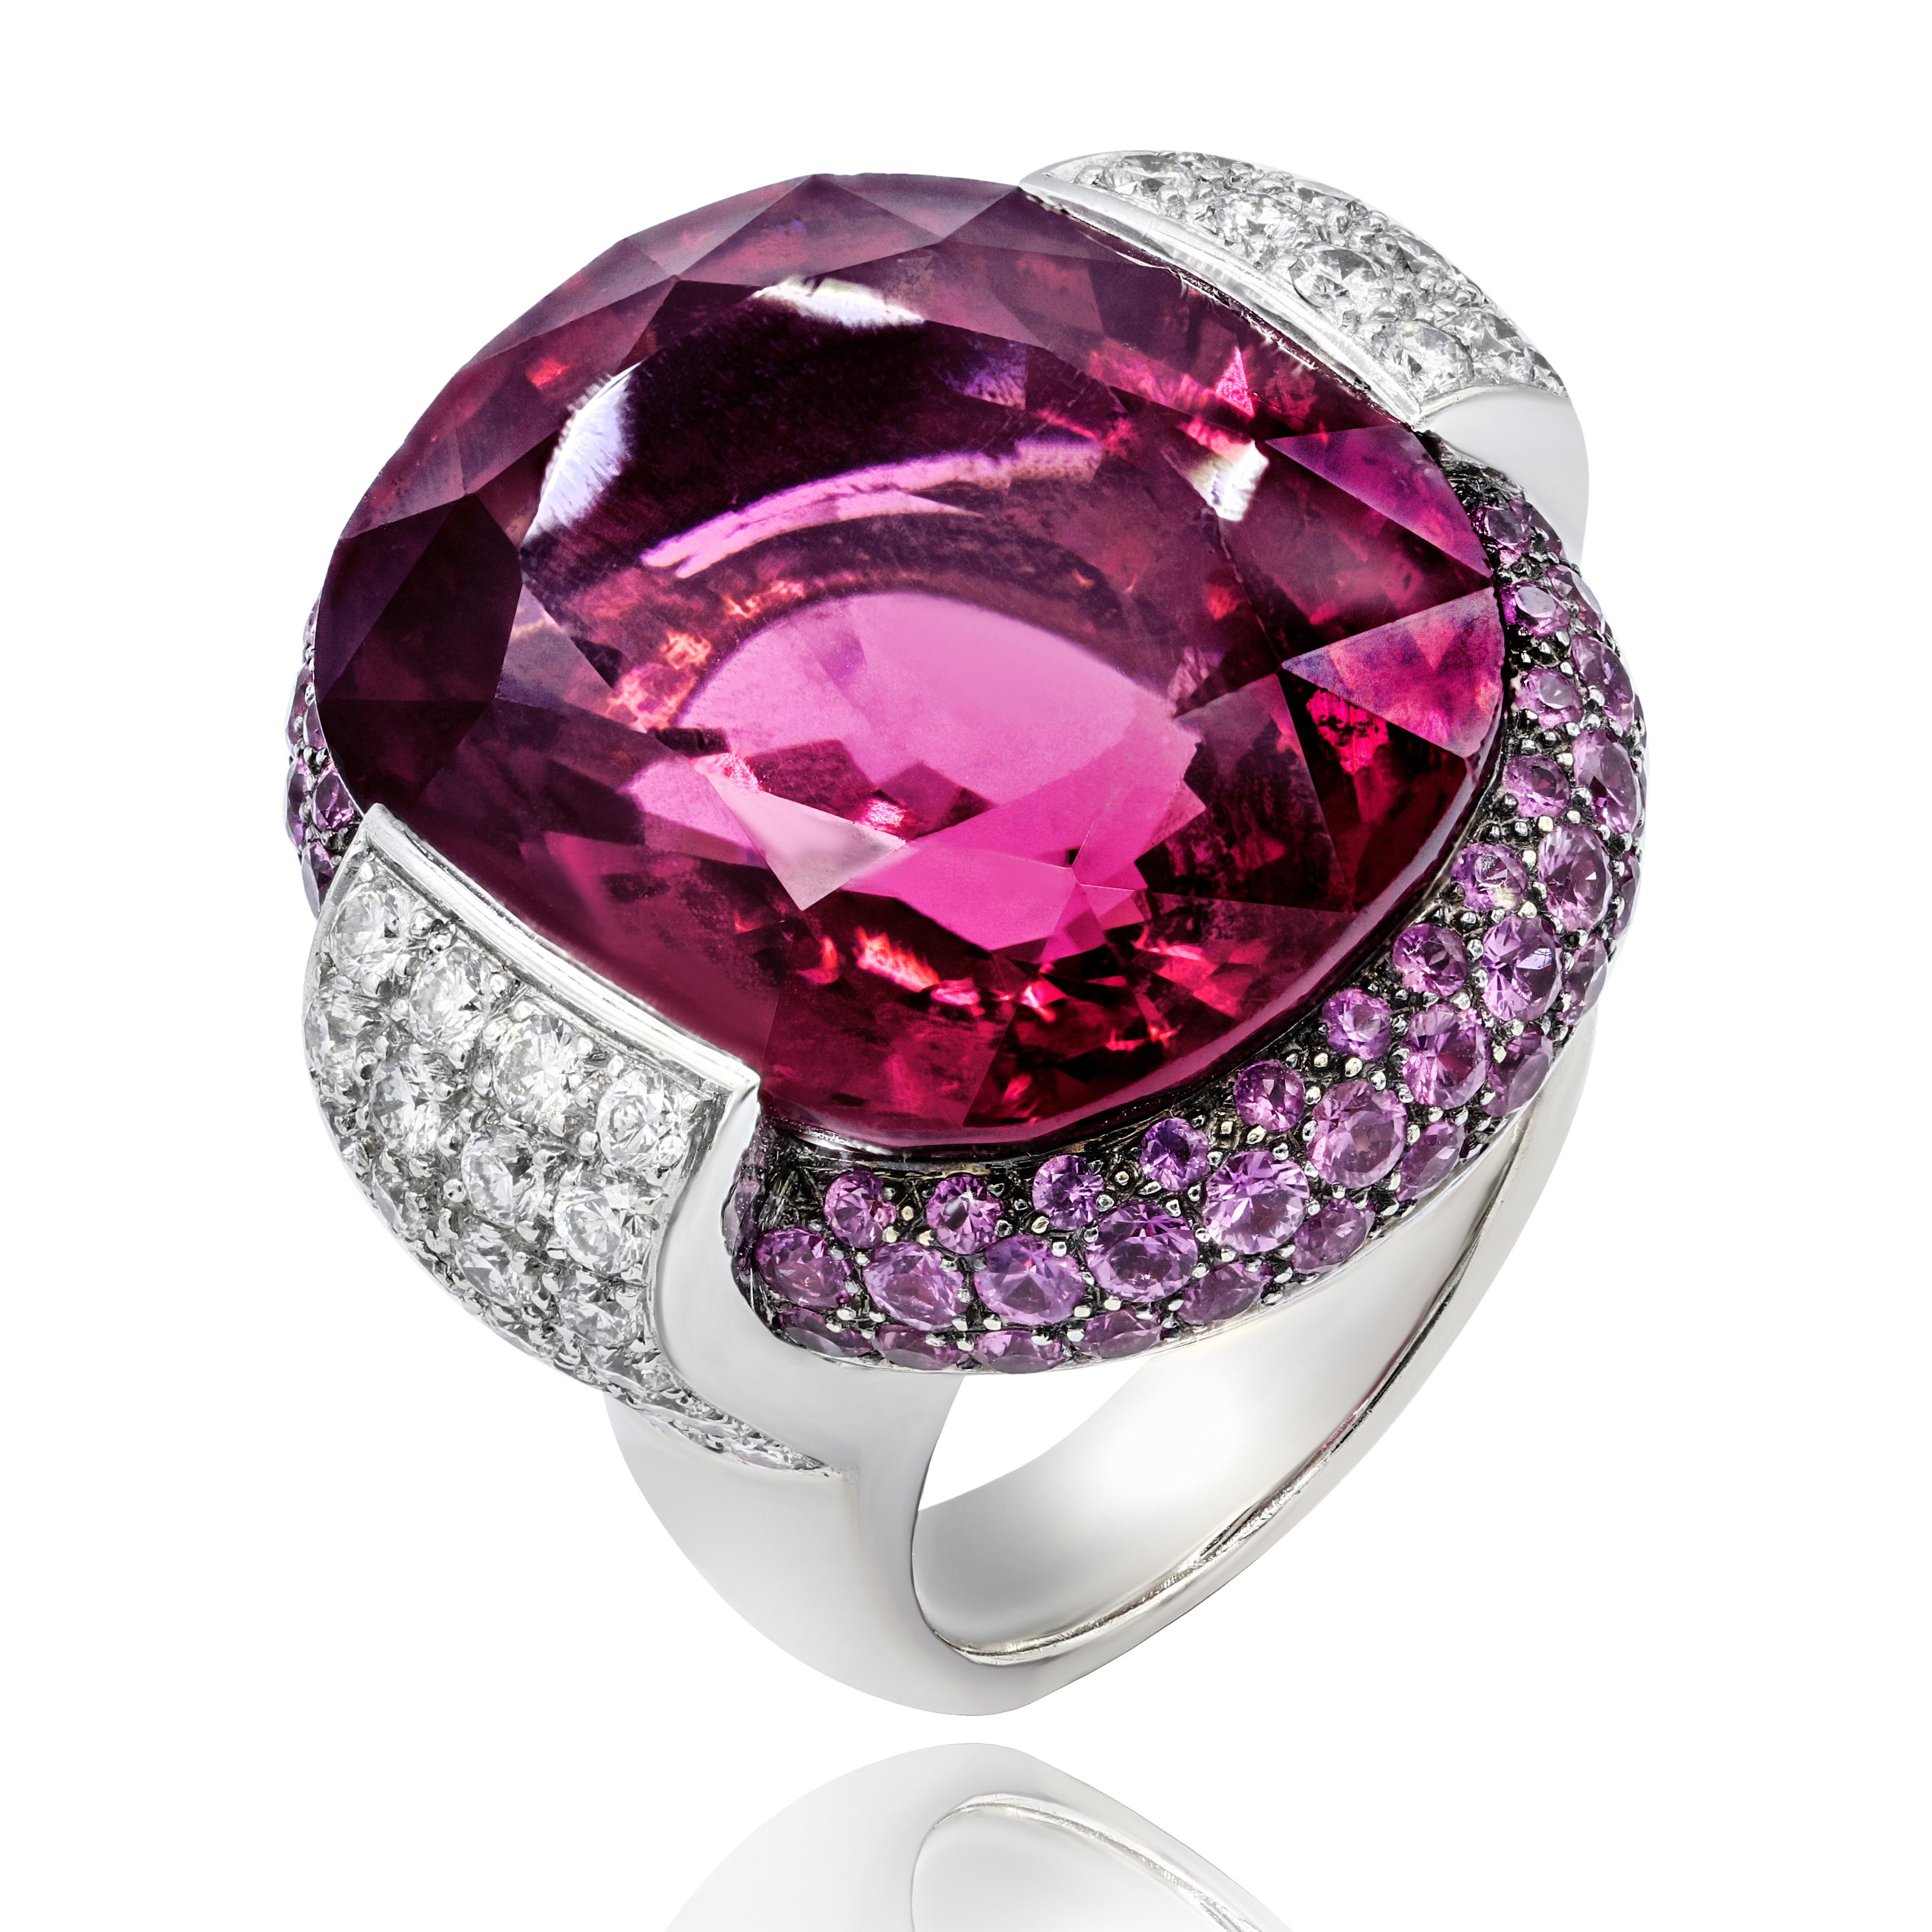 Fashion 18K White gold tourmaline diamond ring with center 35.00 ct tourmaline oval shape in a pink sapphire halo features 3.00 ct and diamonds on the sides features 2.00 ct round diamonds